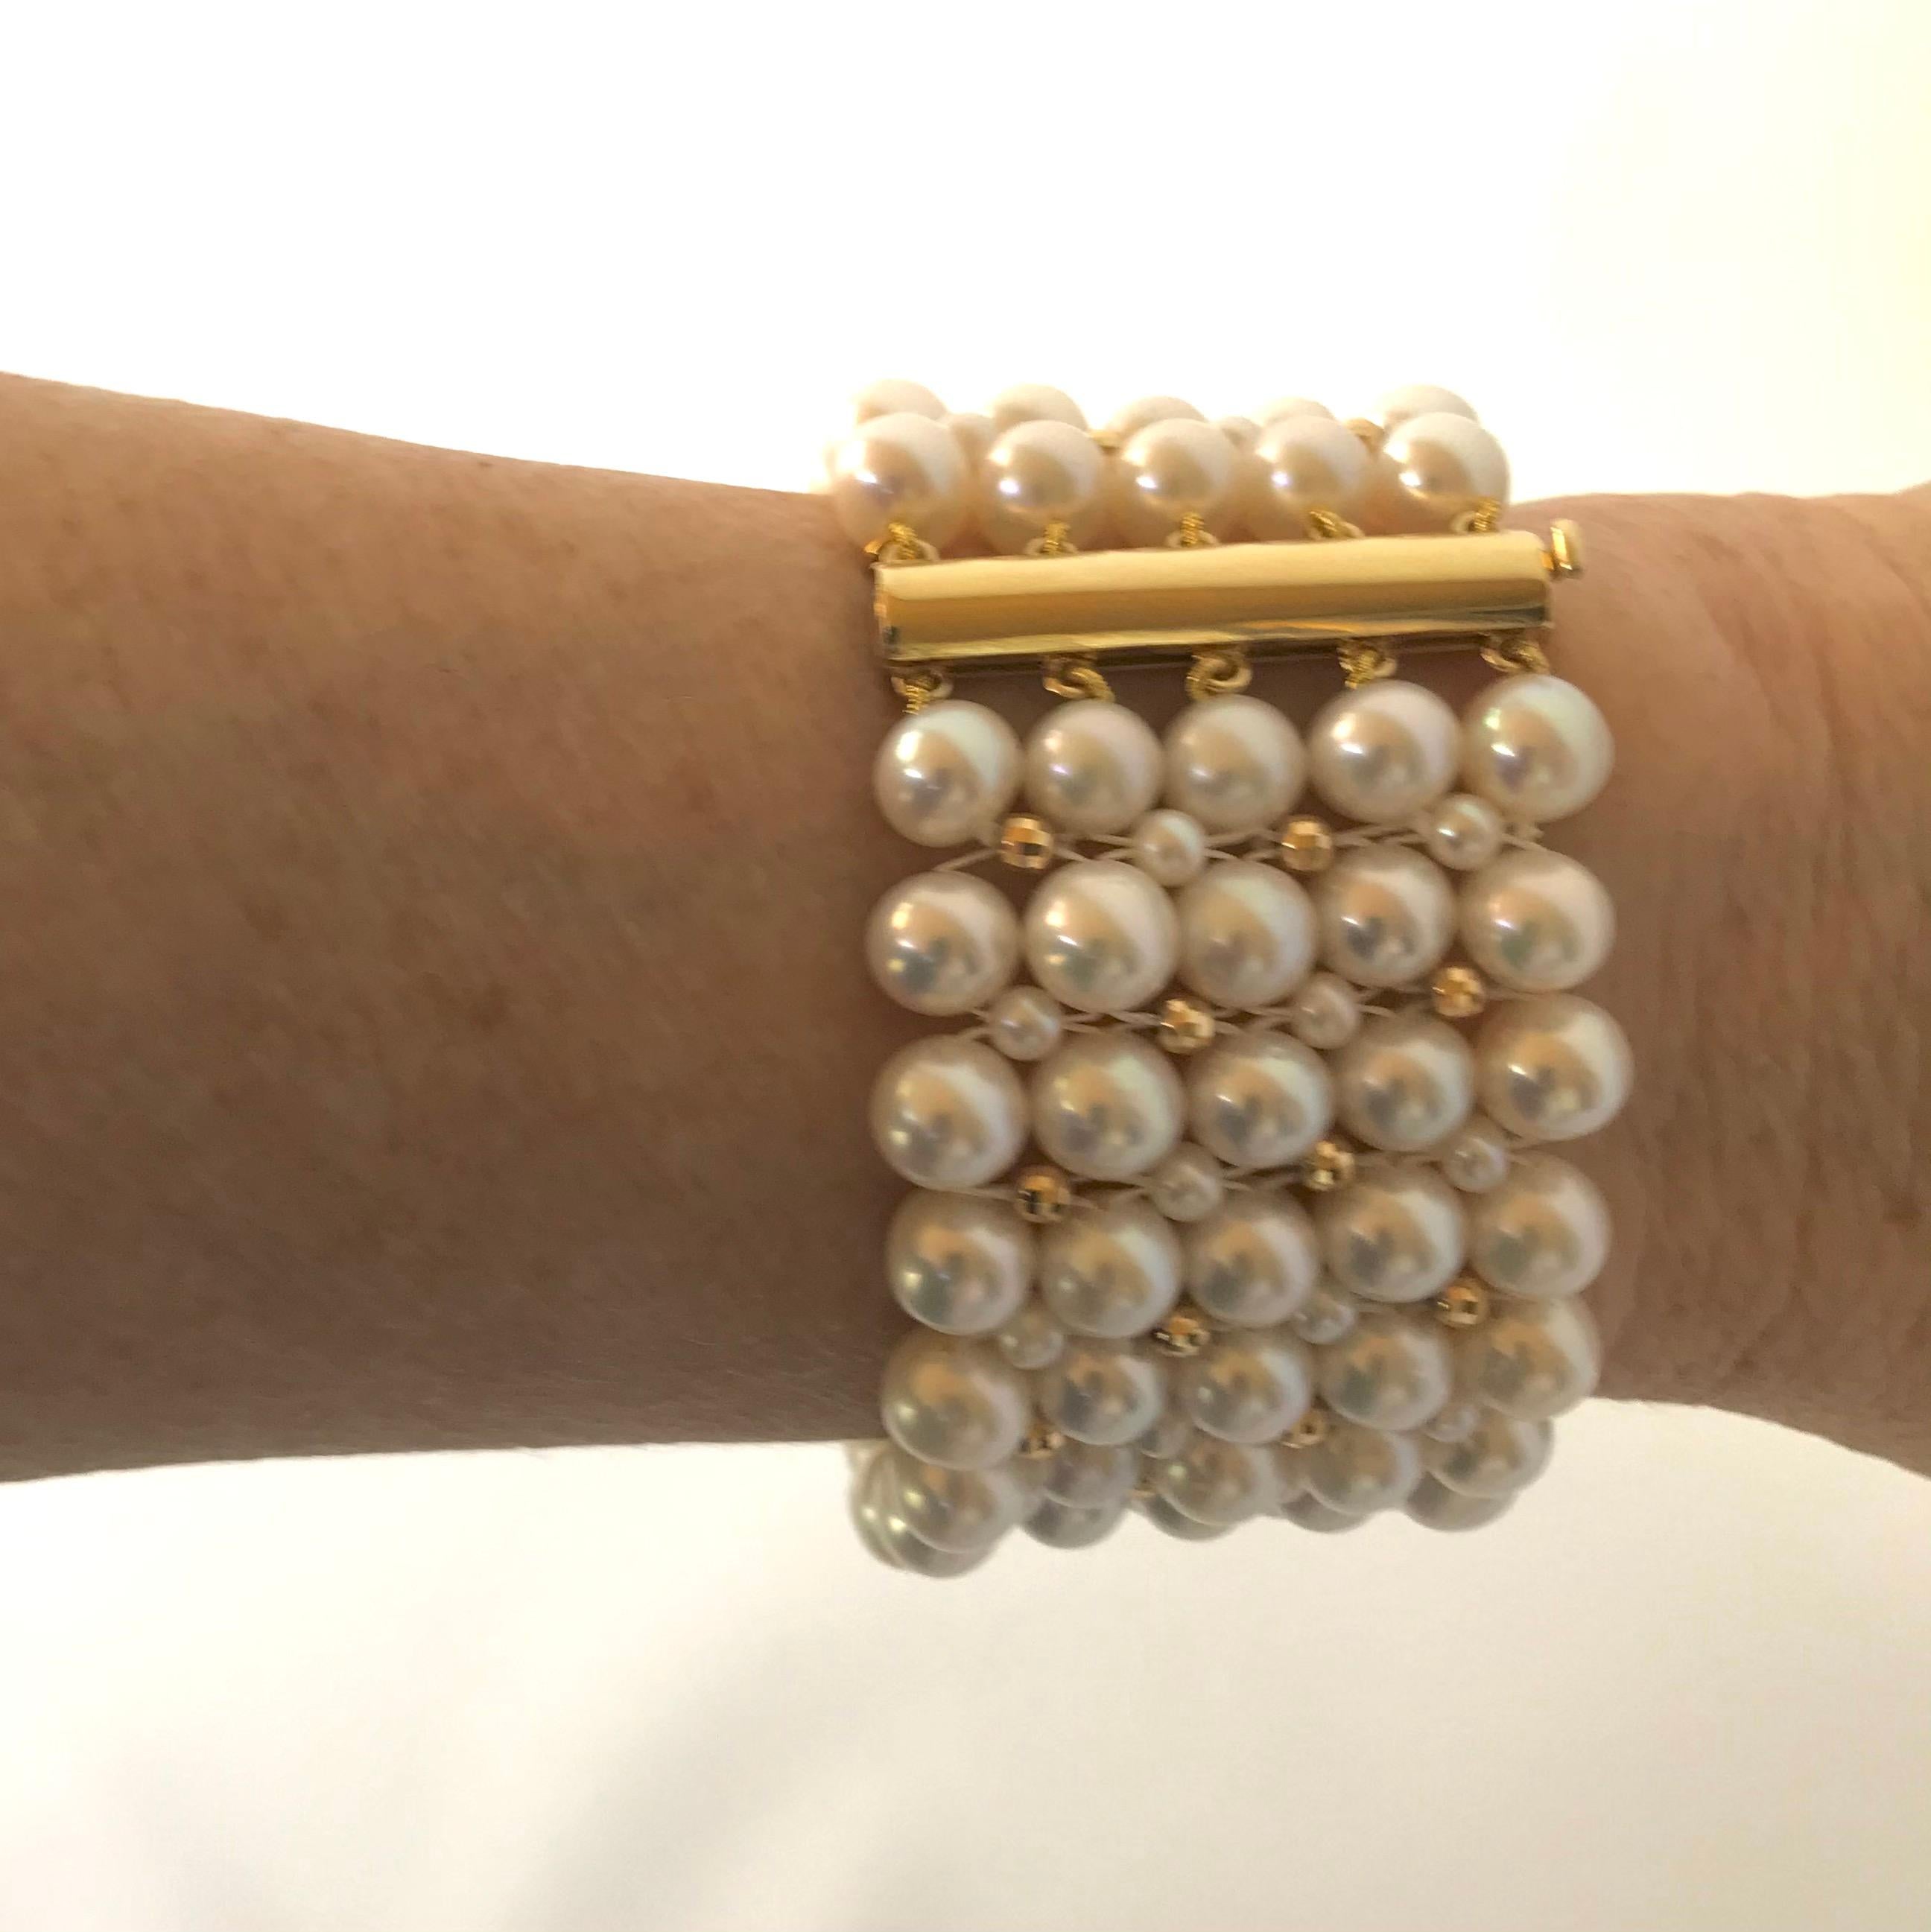 Marina J Stunning Woven Pearl Bracelet with 14 Karat Yellow Gold Beads and Clasp For Sale 2